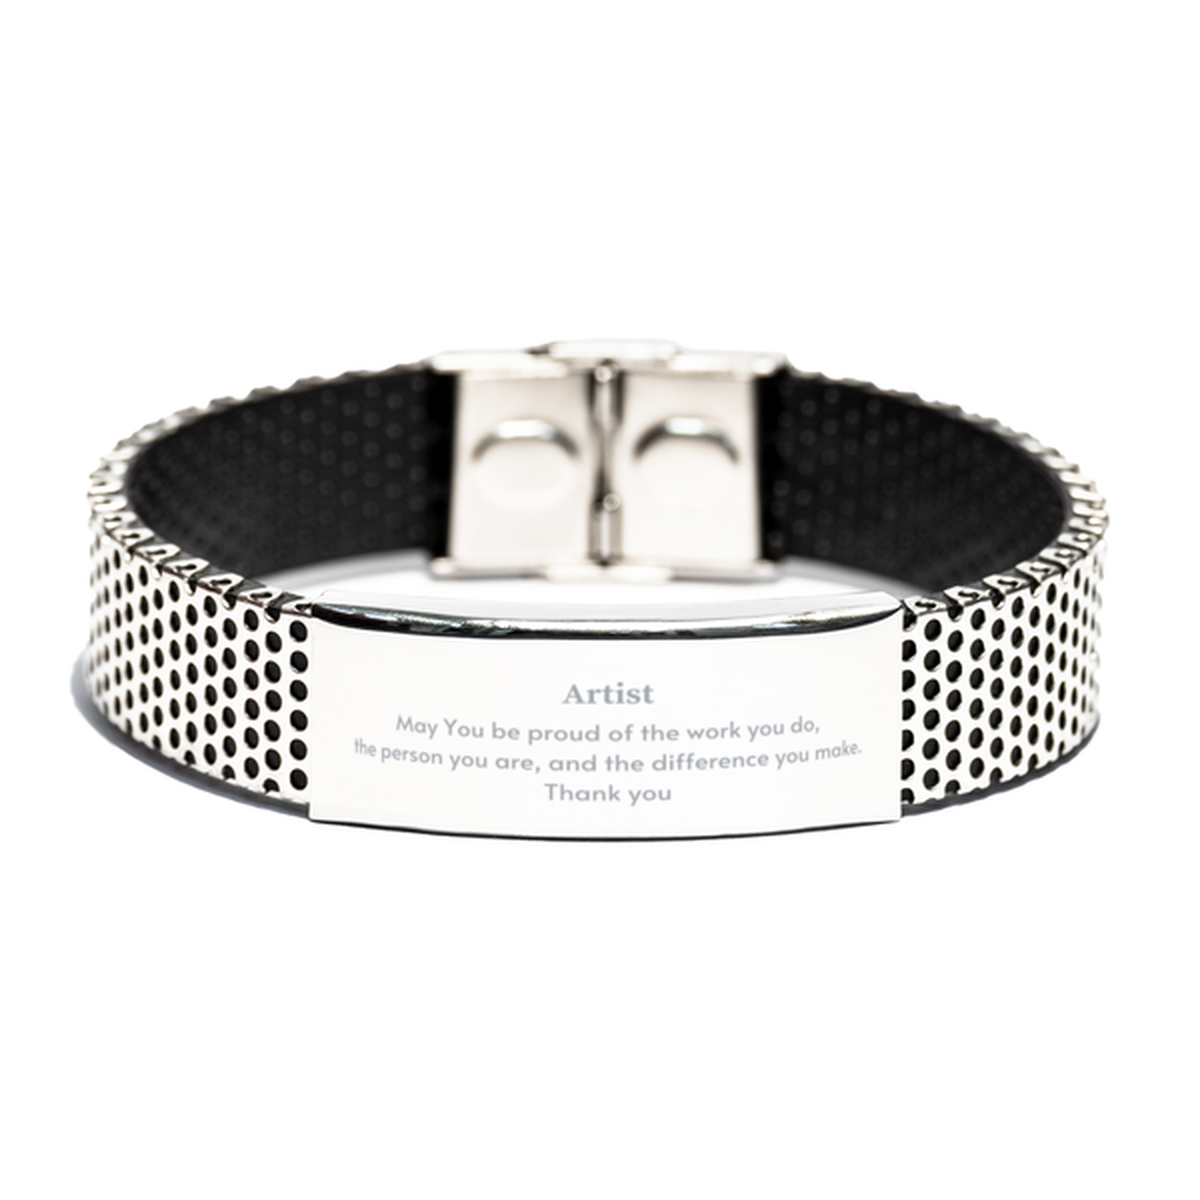 Heartwarming Stainless Steel Bracelet Retirement Coworkers Gifts for Artist, Artist May You be proud of the work you do, the person you are Gifts for Boss Men Women Friends